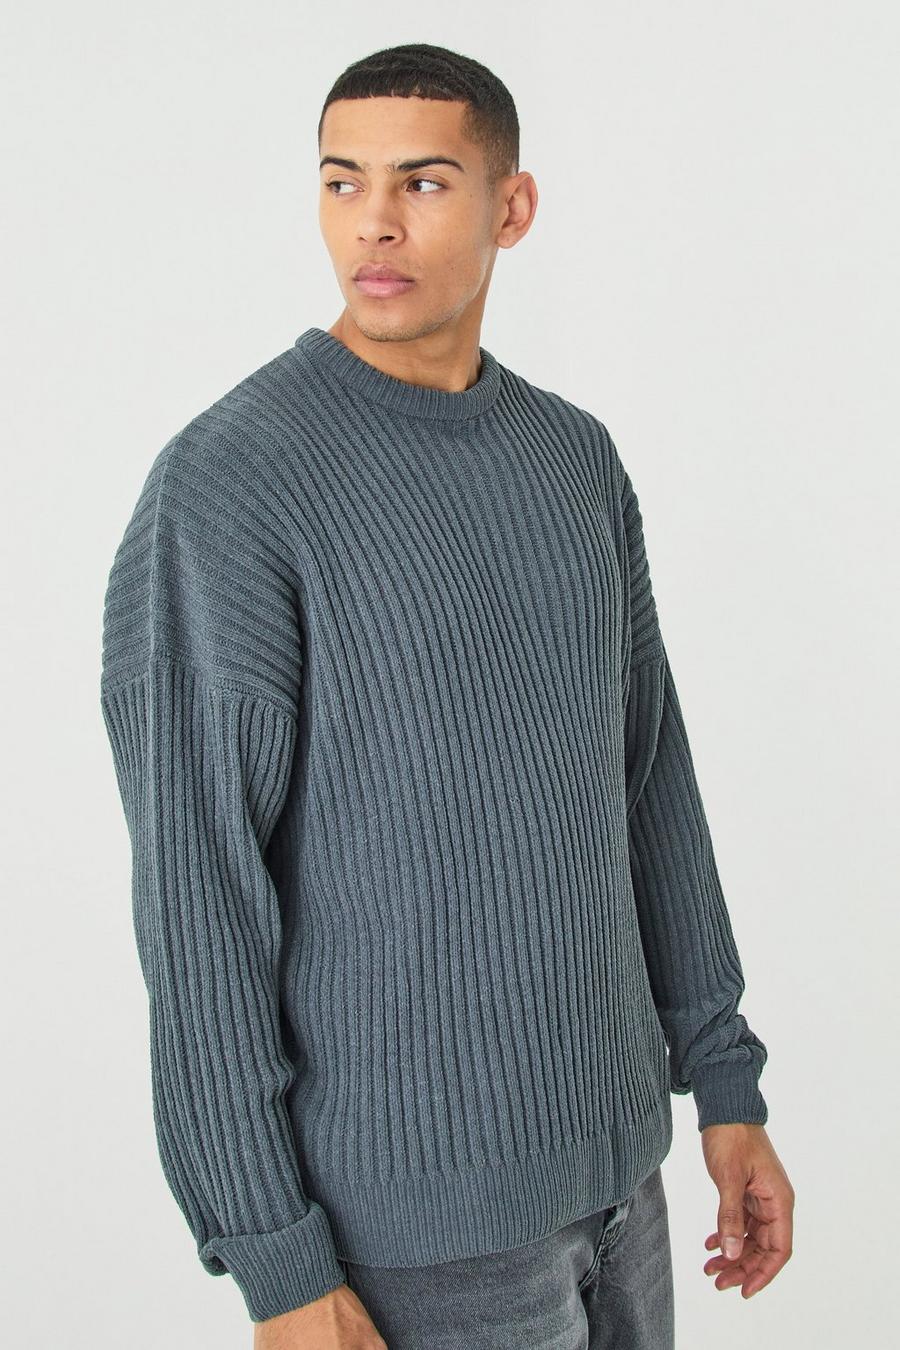 Gerippter Oversize Rundhals-Pullover, Charcoal grey